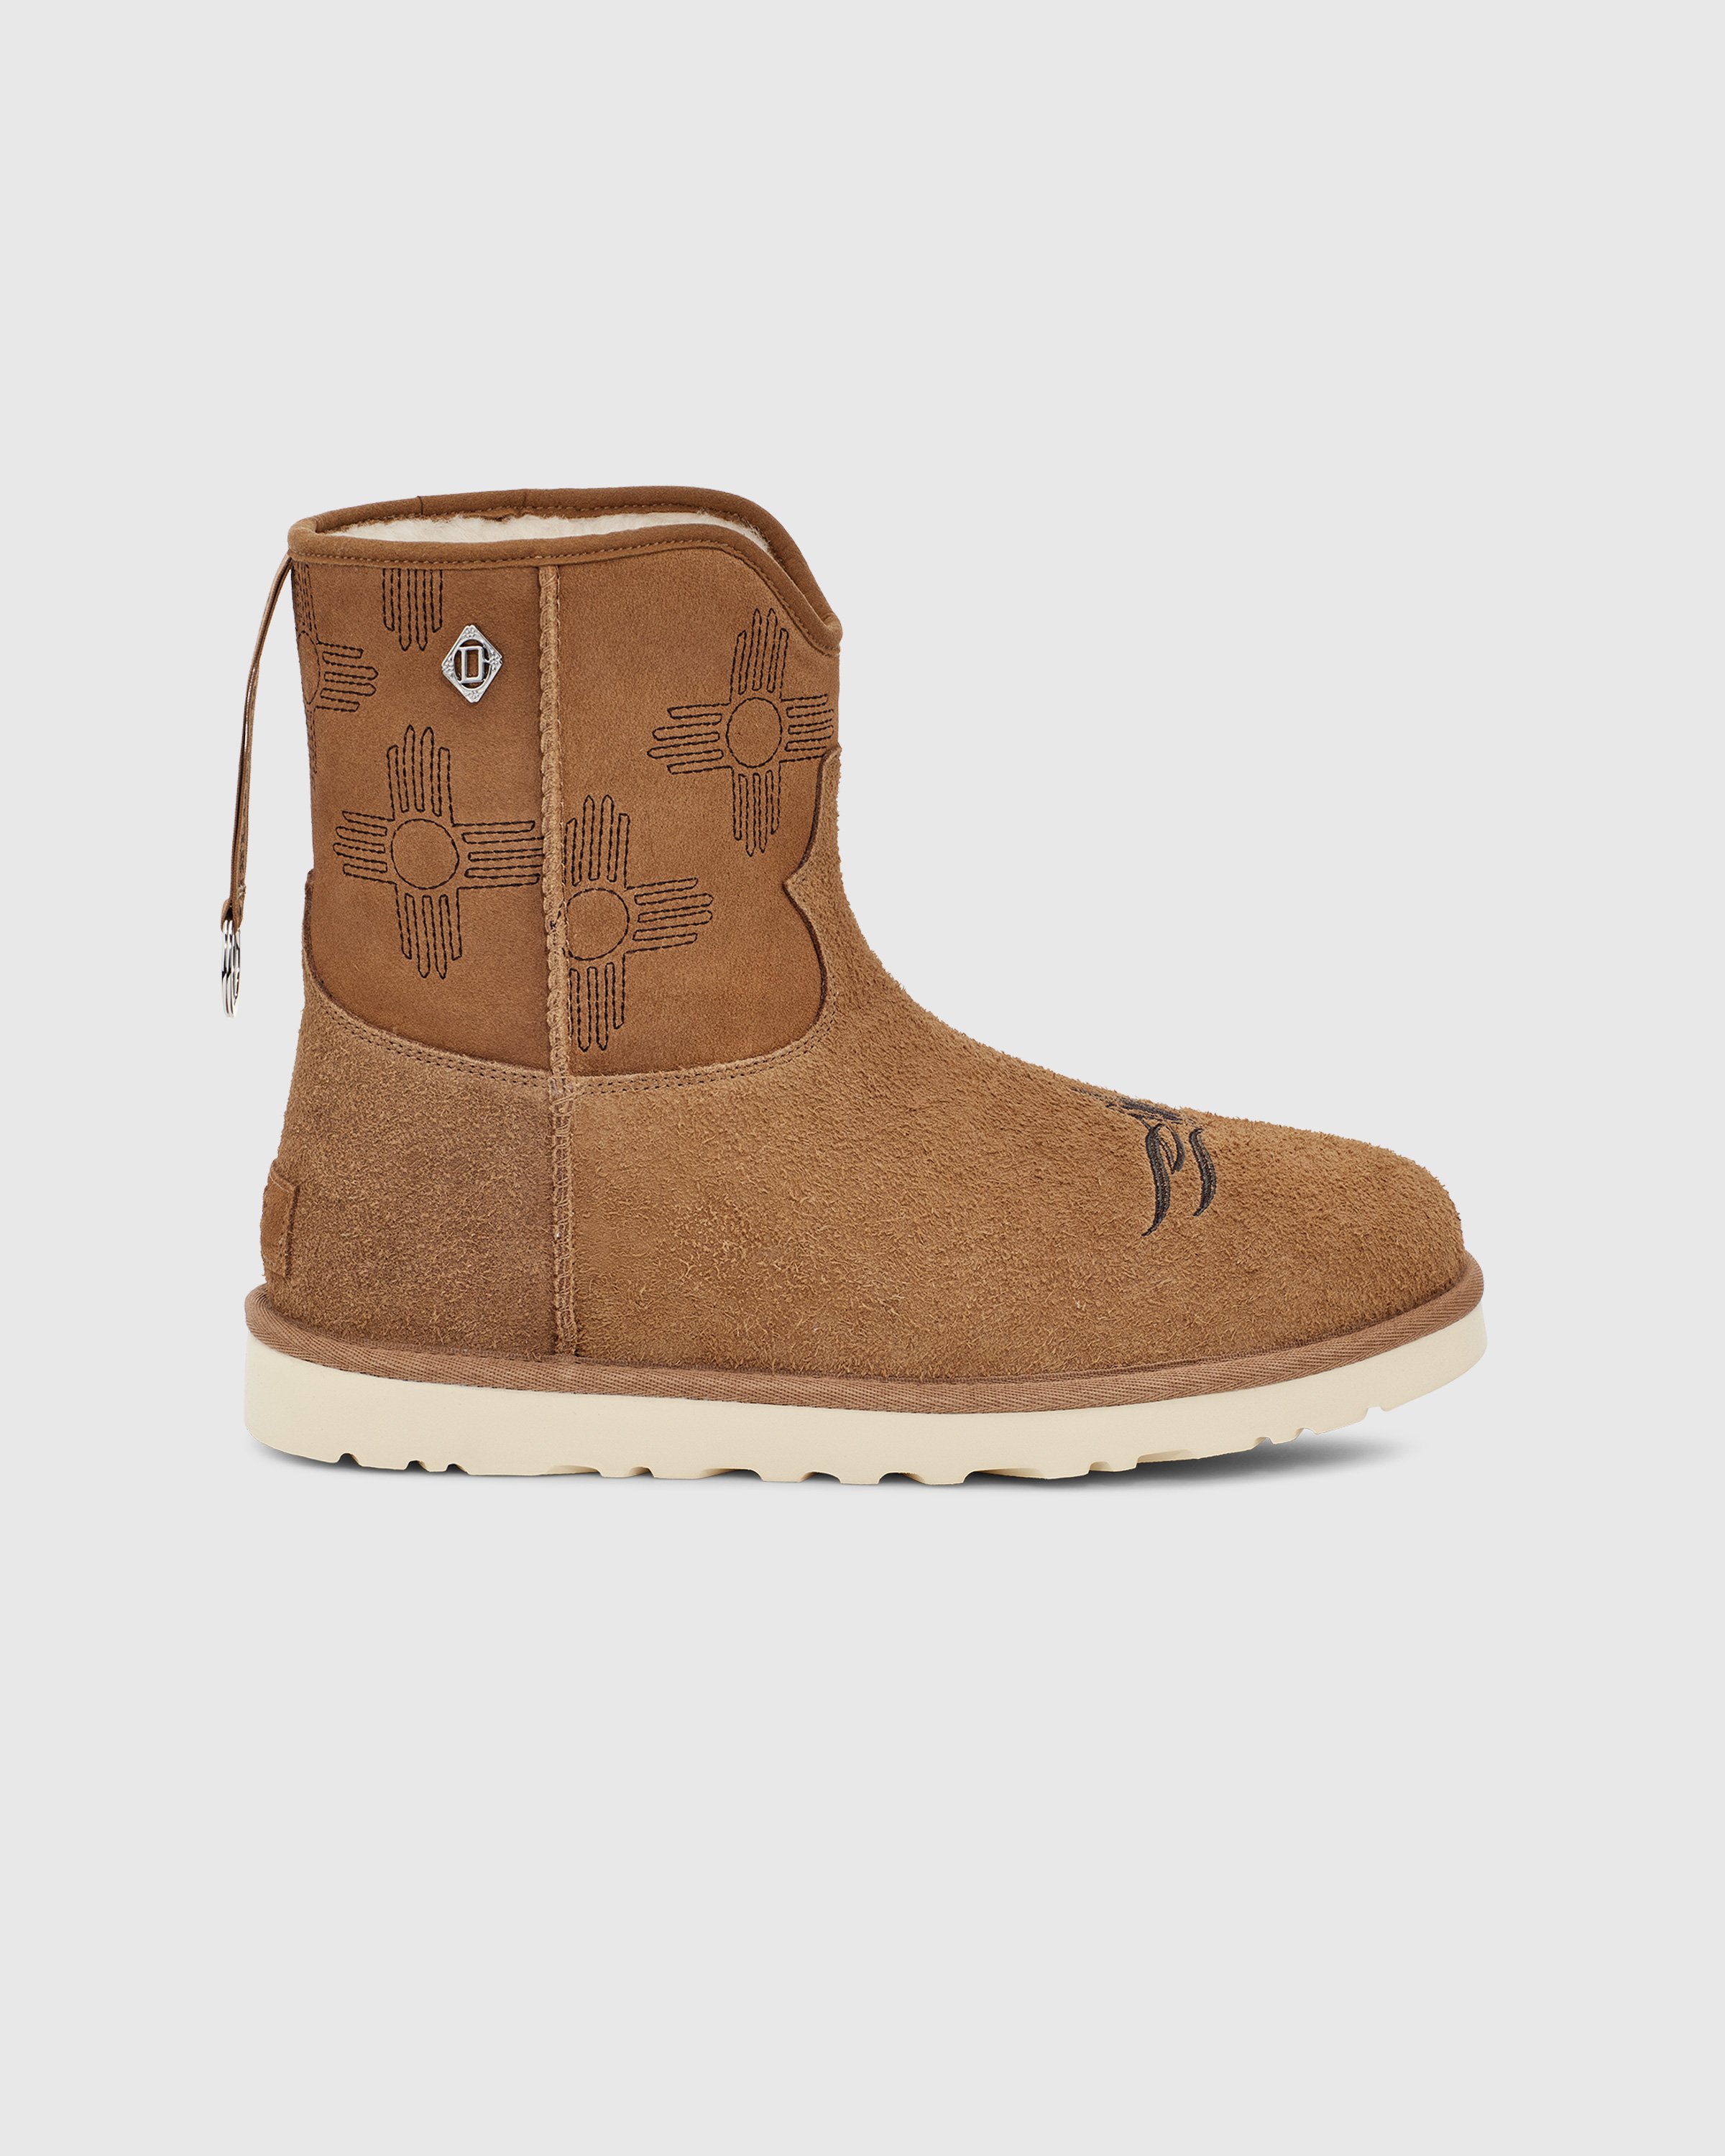 Ugg x Children of the Discordance - Classic Short Boot Brown - Footwear - Brown - Image 1